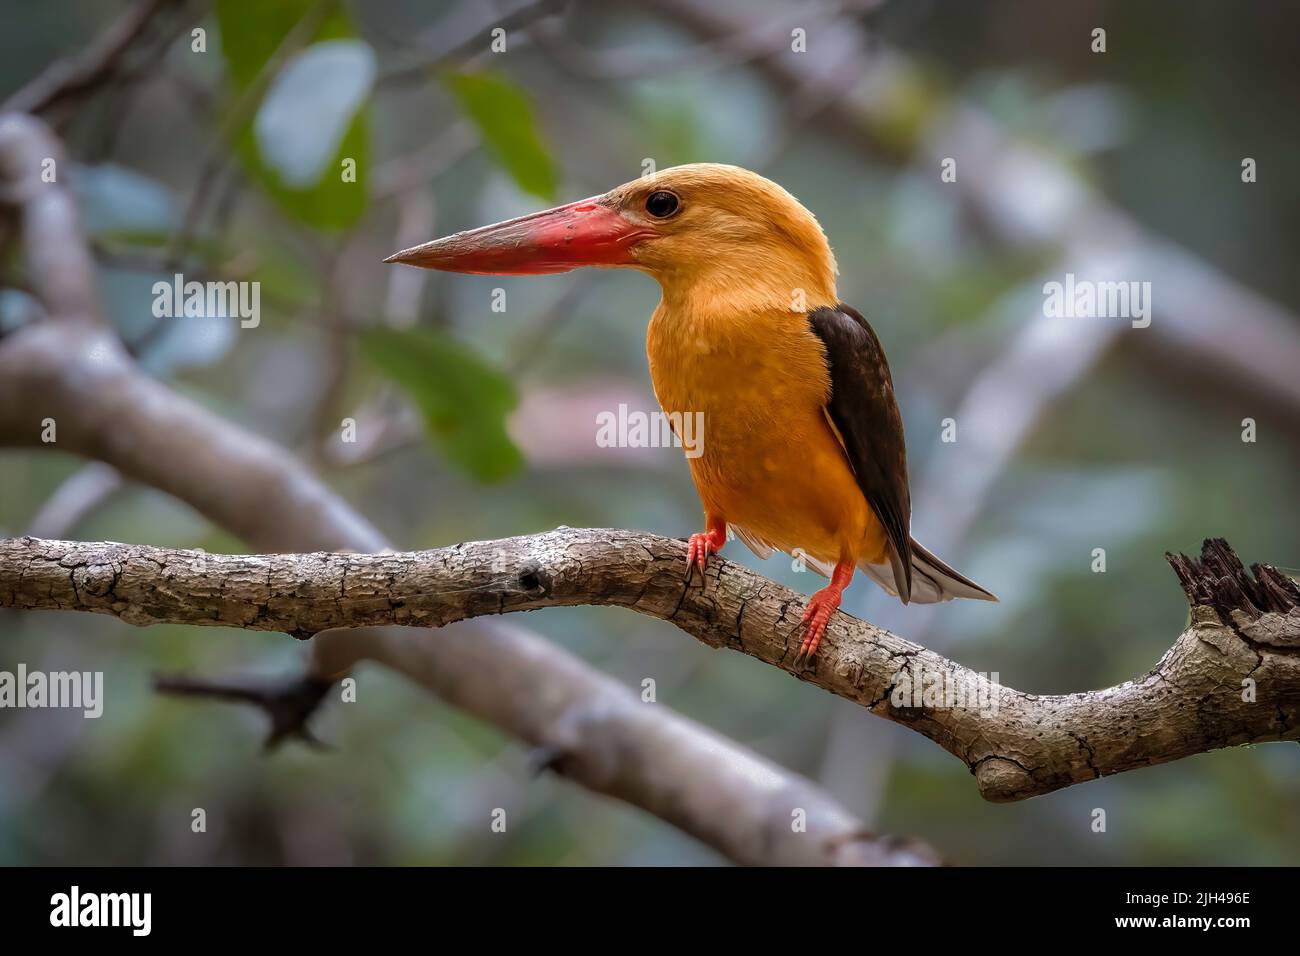 Close-up of a Brown-winged Kingfisher perched on a branch Stock Photo